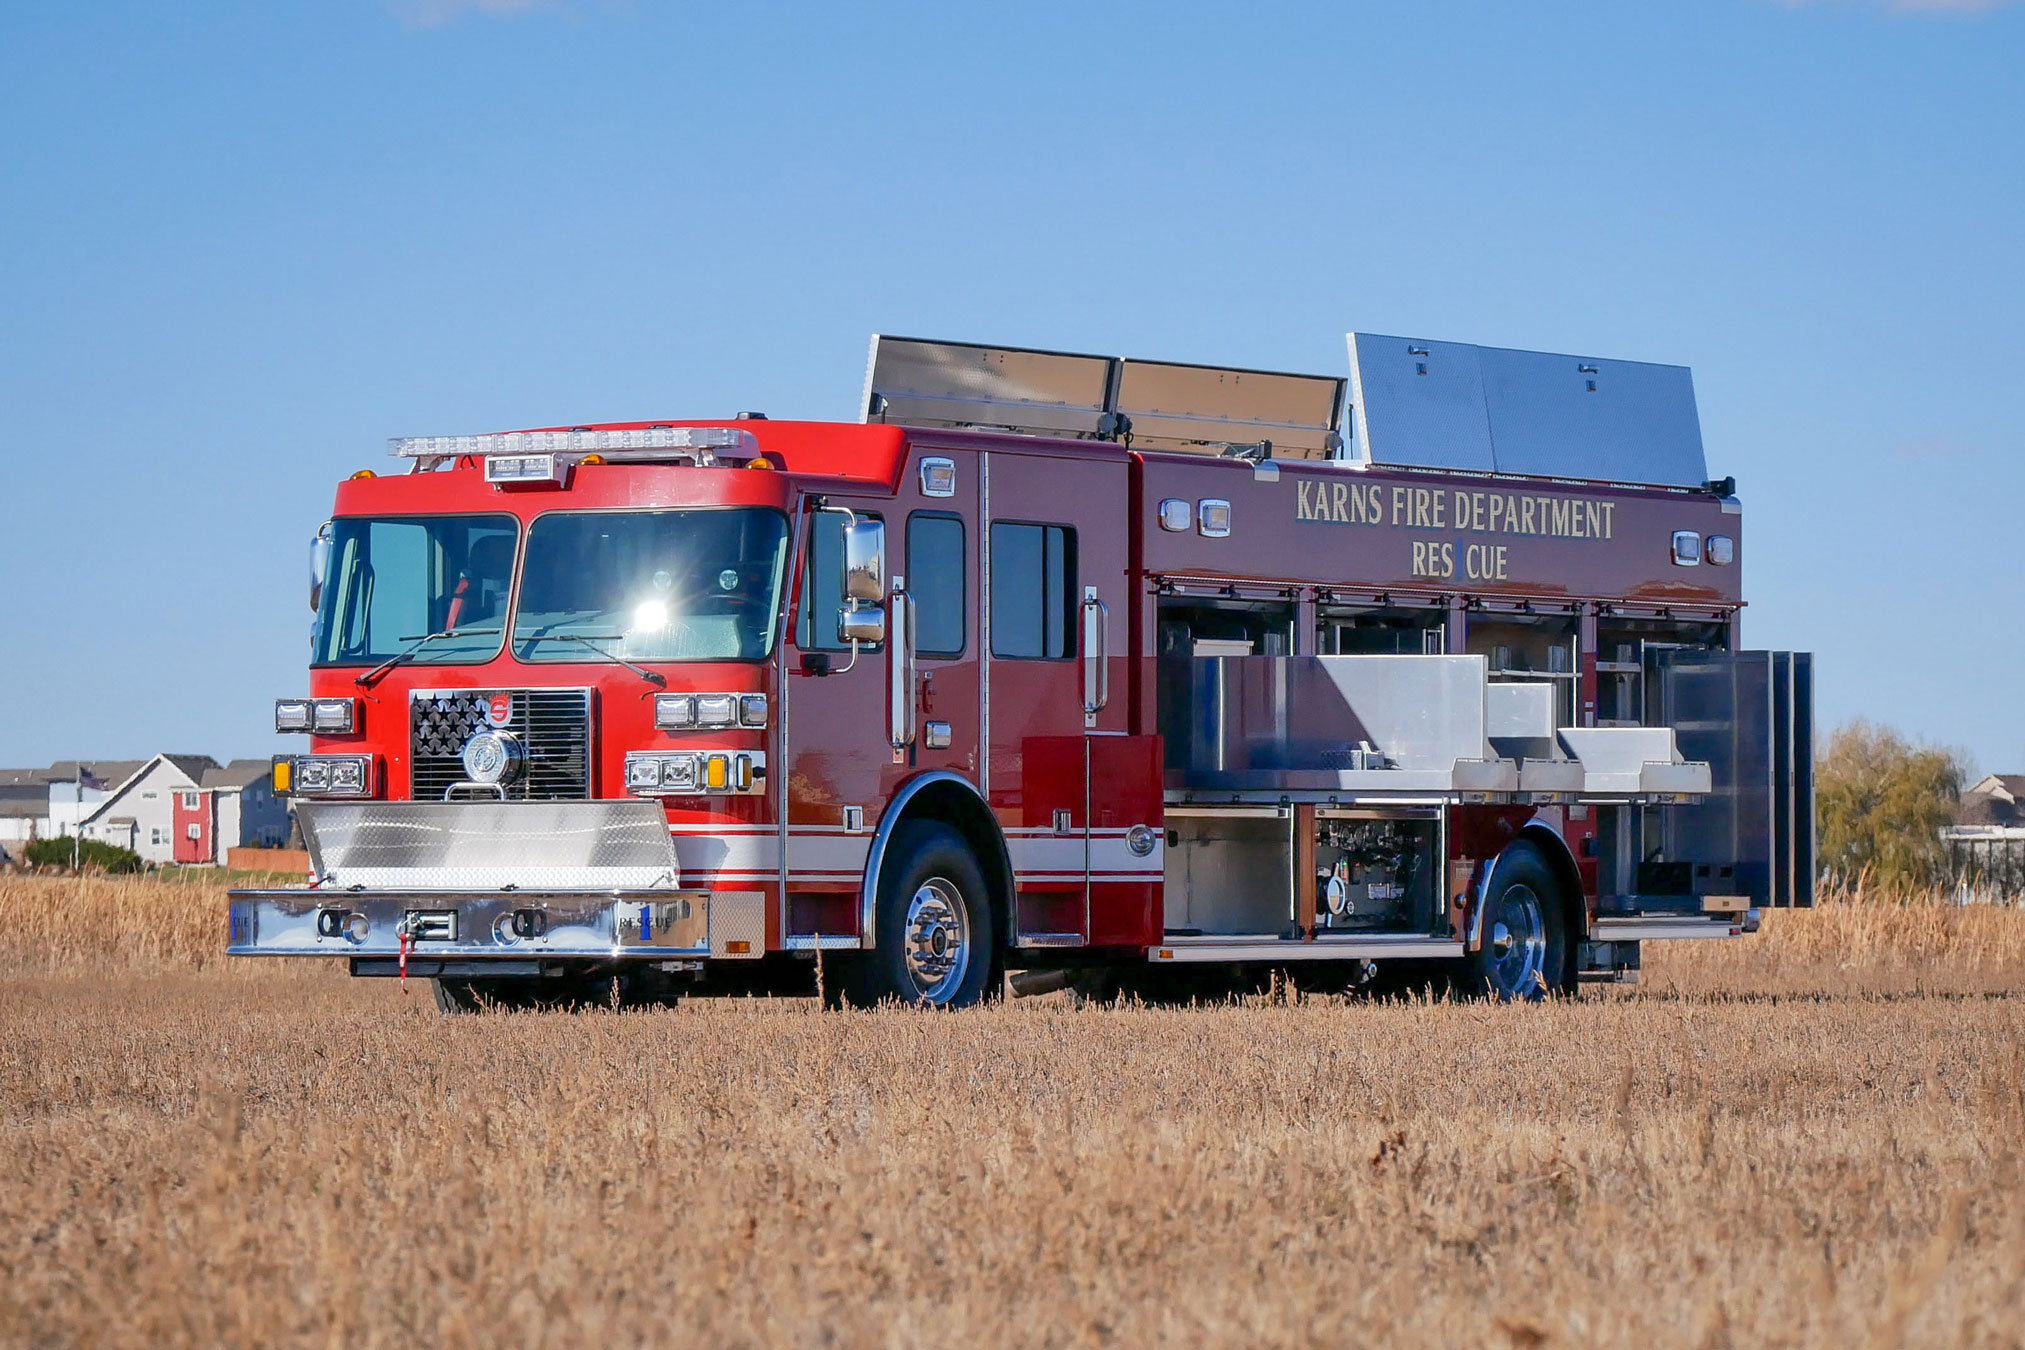 Featured image for “Karns Fire Department, Knoxville (TN) Heavy Rescue #1230”